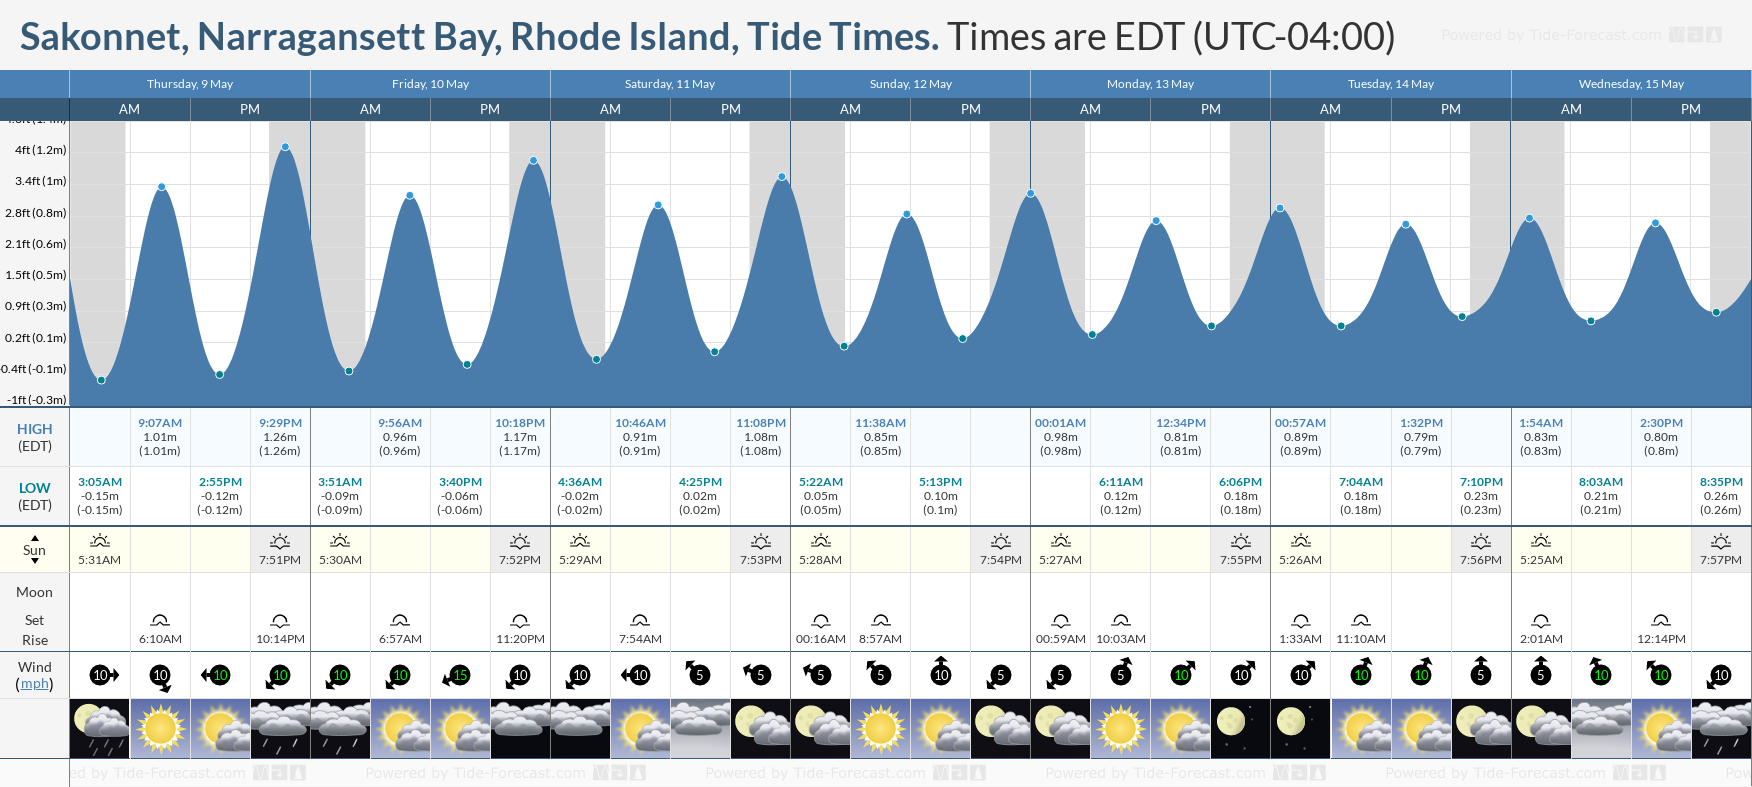 Sakonnet, Narragansett Bay, Rhode Island Tide Chart including high and low tide tide times for the next 7 days